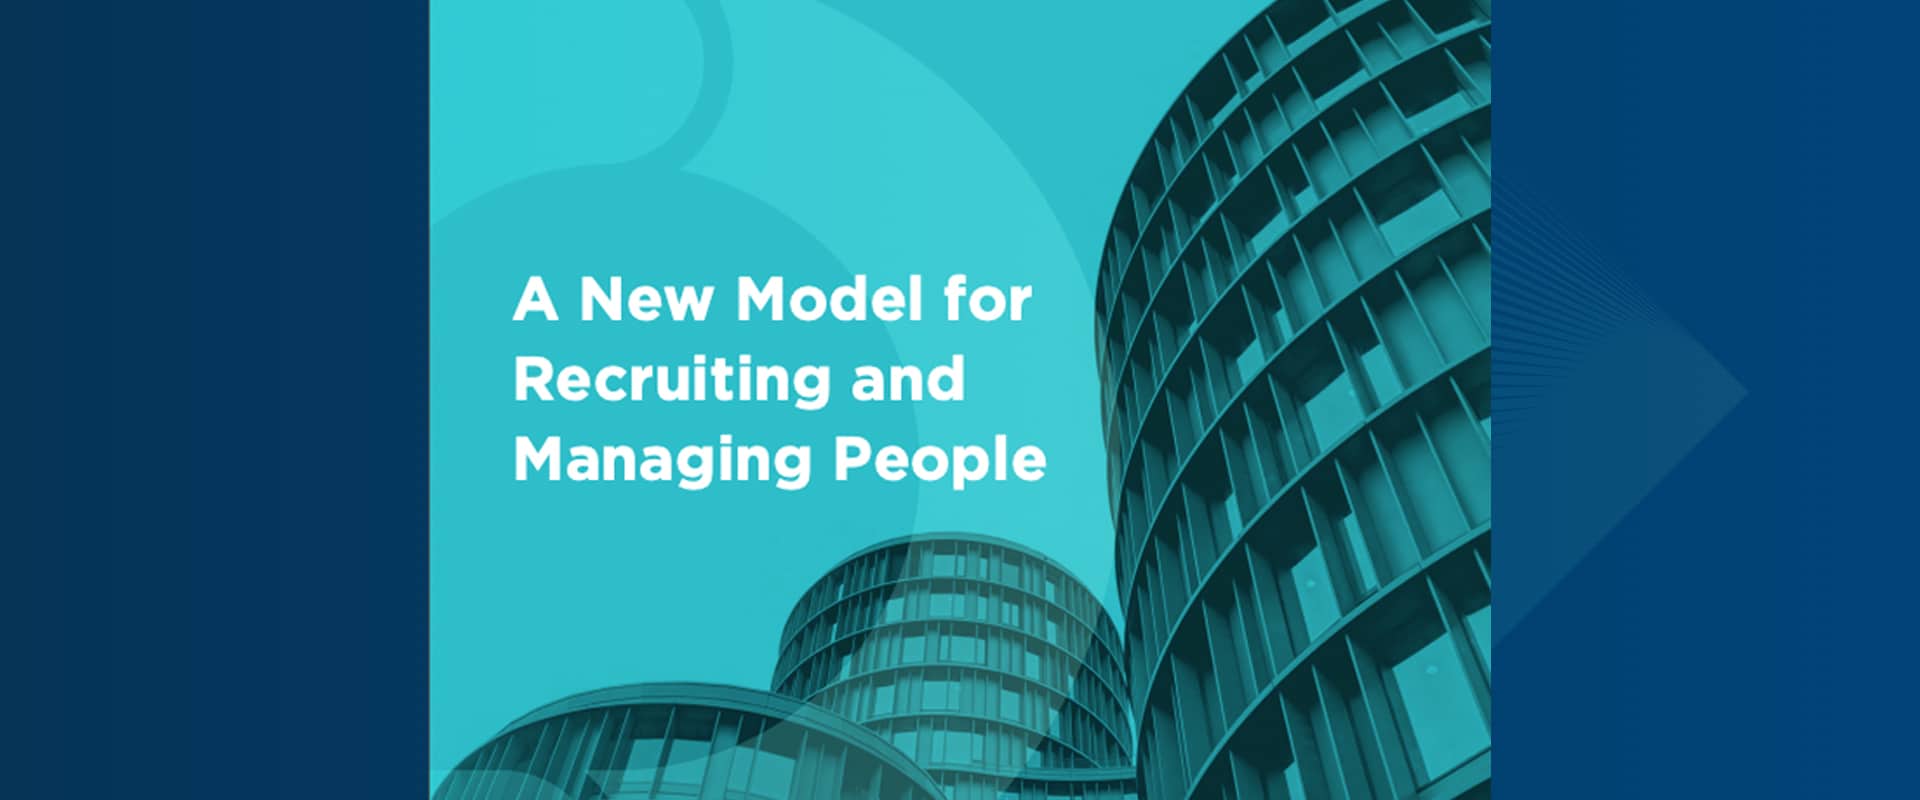 A new model for recruiting and managing people